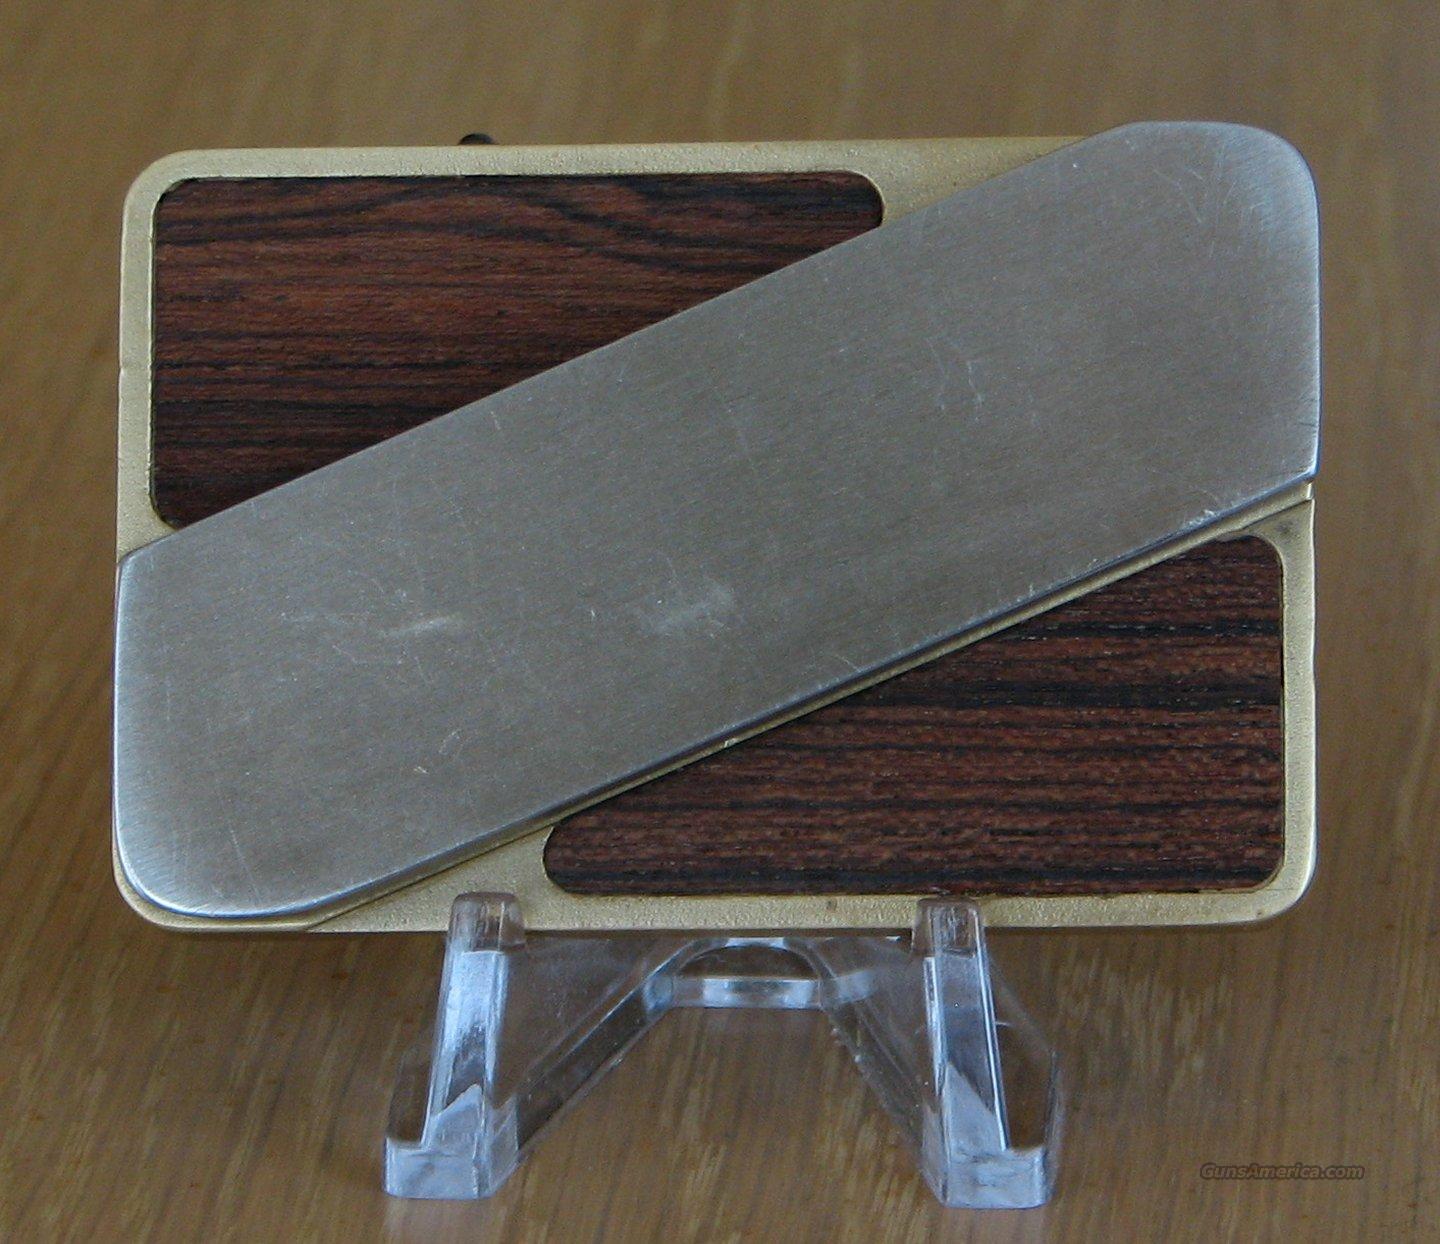 Gerber Touche buckle knife for sale